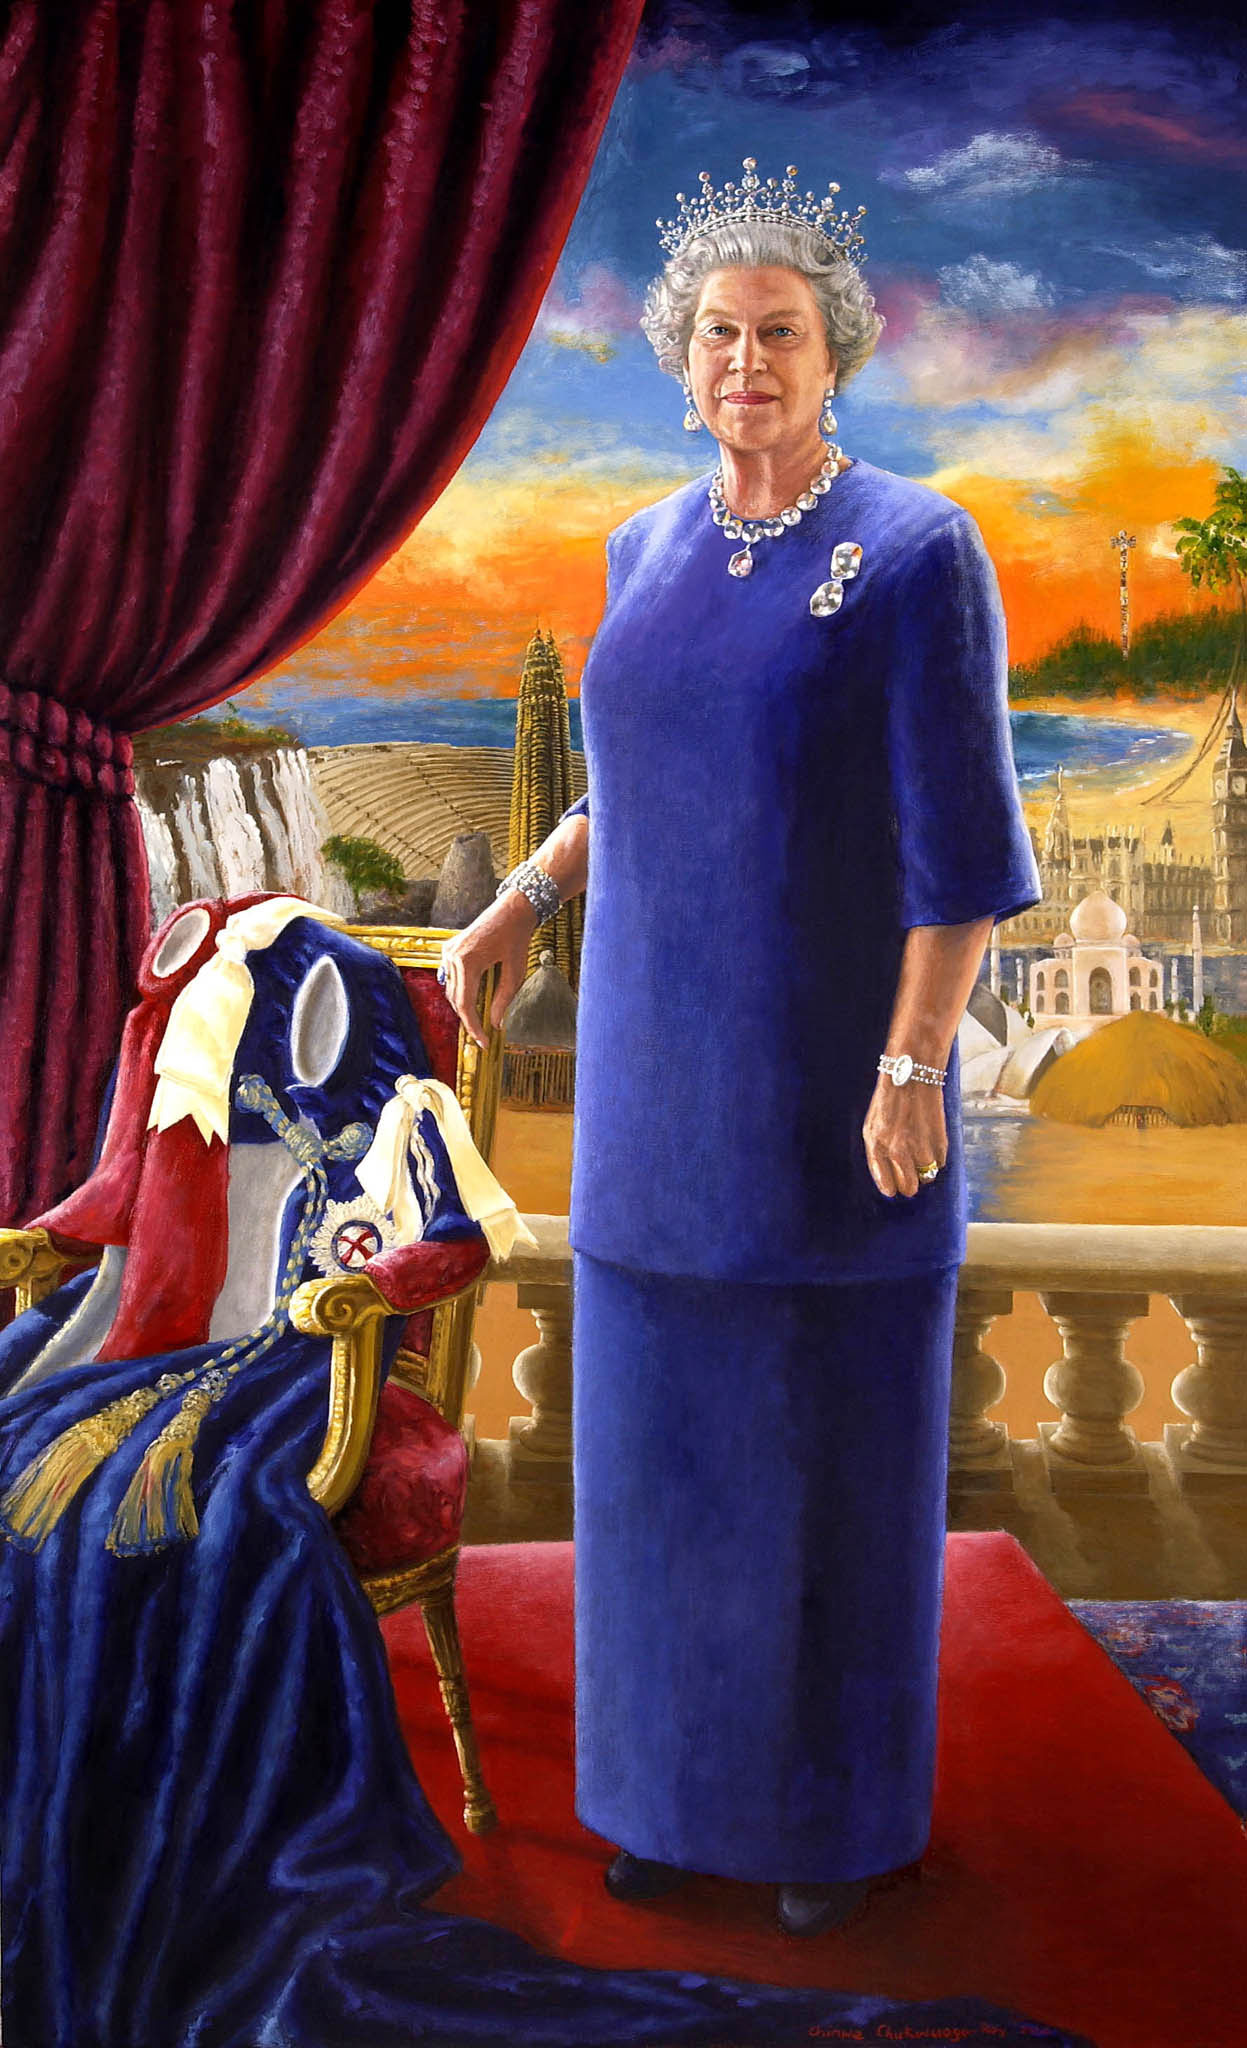 A colourful painting of a tall Queen Elizabeth II in a purple dress in front of an imaginary landscape.